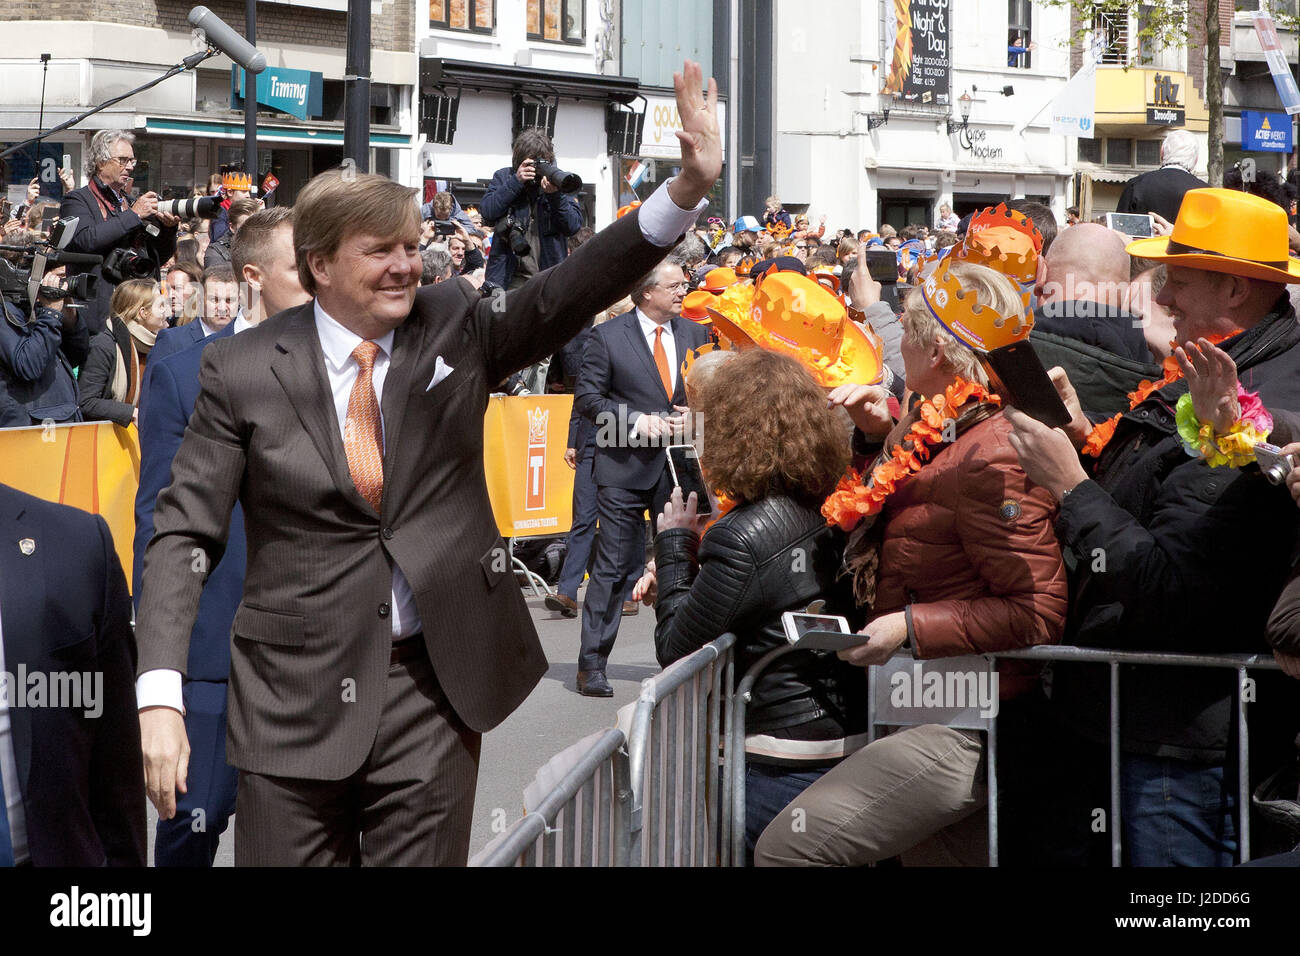 April 27, 2017 - Tilburg, Noord-Brabant, Netherlands - Tilburg, the Netherlands. Kingsday 2017 in Holland . The royal family celebrates the 50th anniversary of King Willem-Alexander today in Tilburg. Present are: King Willem-Alexander, Queen MÃ¡xima and their three daughters Amalia, Ariane and Alexia. There are also Prince Constantijn, Prince Laurentien, Prince Maurits, Princess Marilene, Prince Bernard, Princess Annette, Prince Pieter-Kristiaan, Princess Anita, Prince Floris and Princess Aimée. Credit: Paulien Van De Loo/ZUMA Wire/Alamy Live News Stock Photo